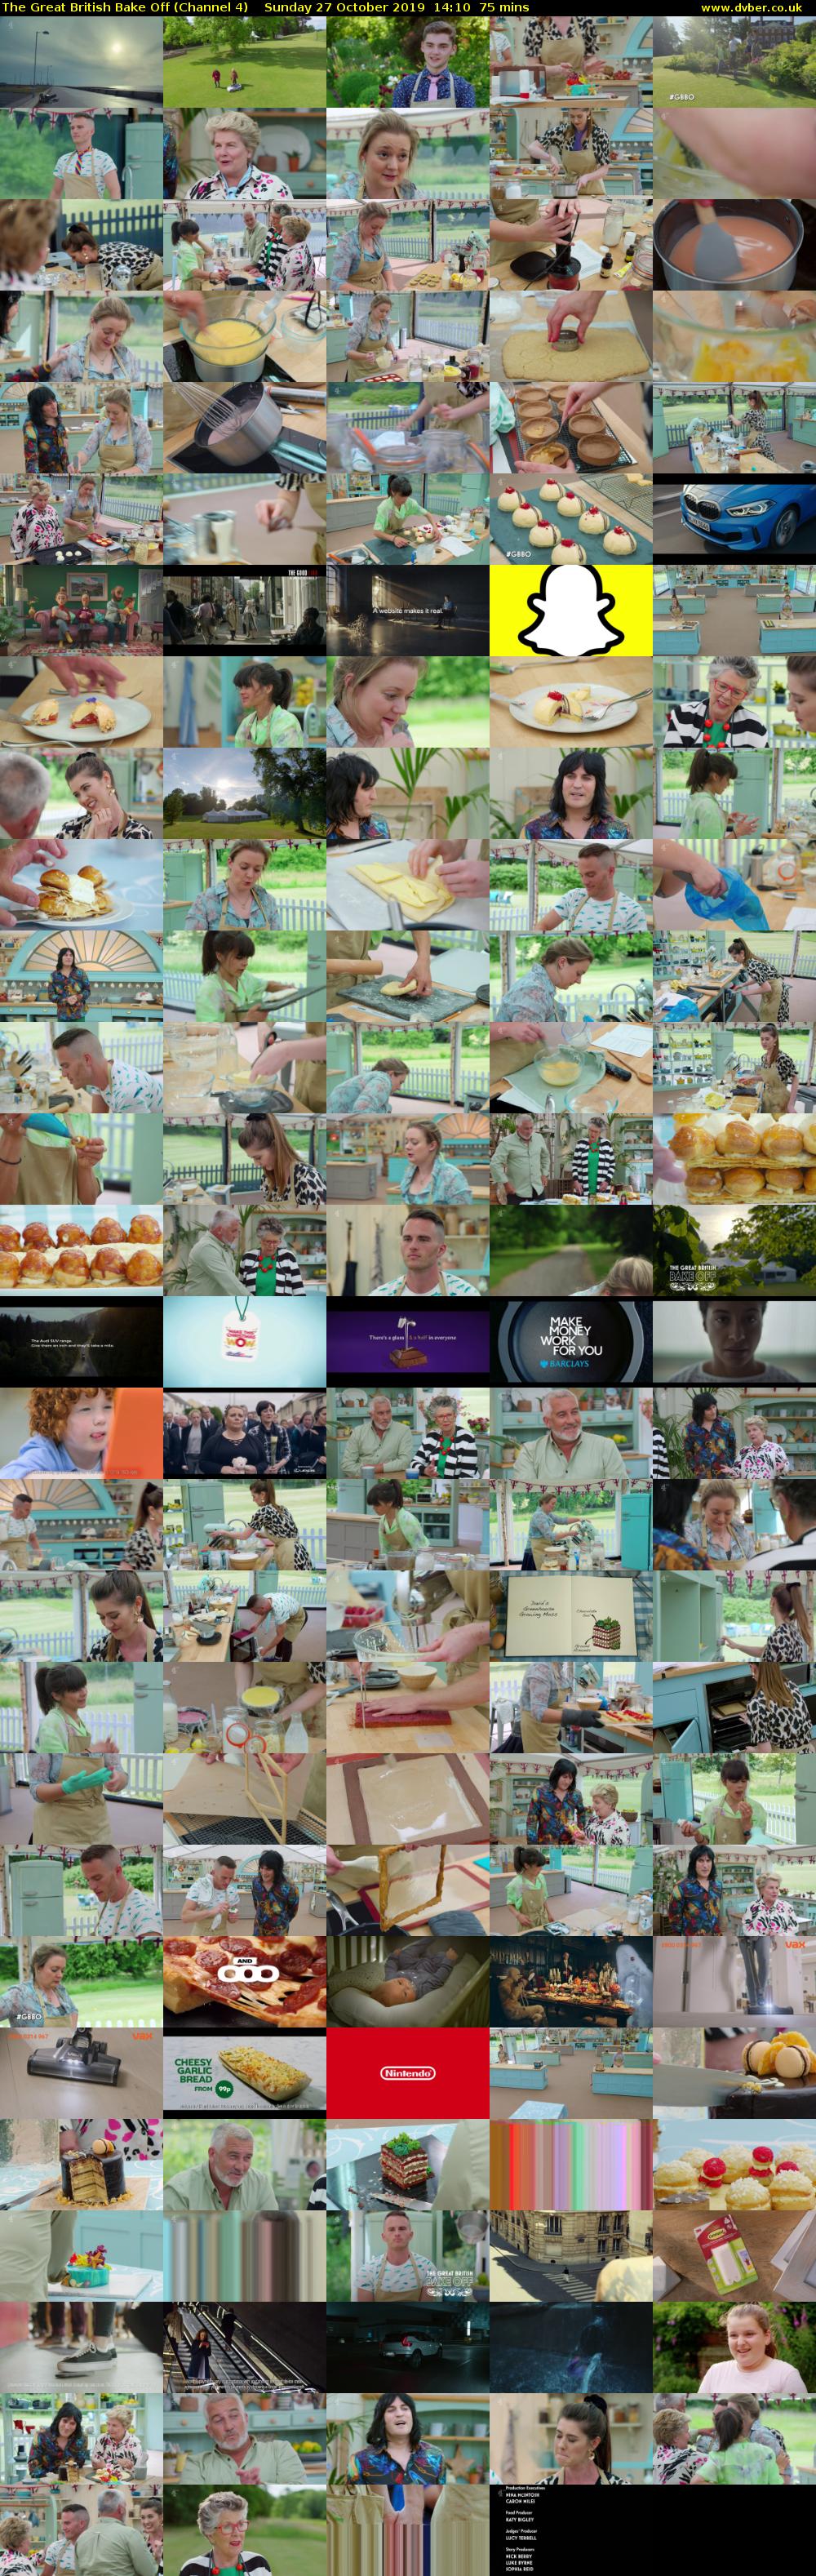 The Great British Bake Off (Channel 4) Sunday 27 October 2019 14:10 - 15:25